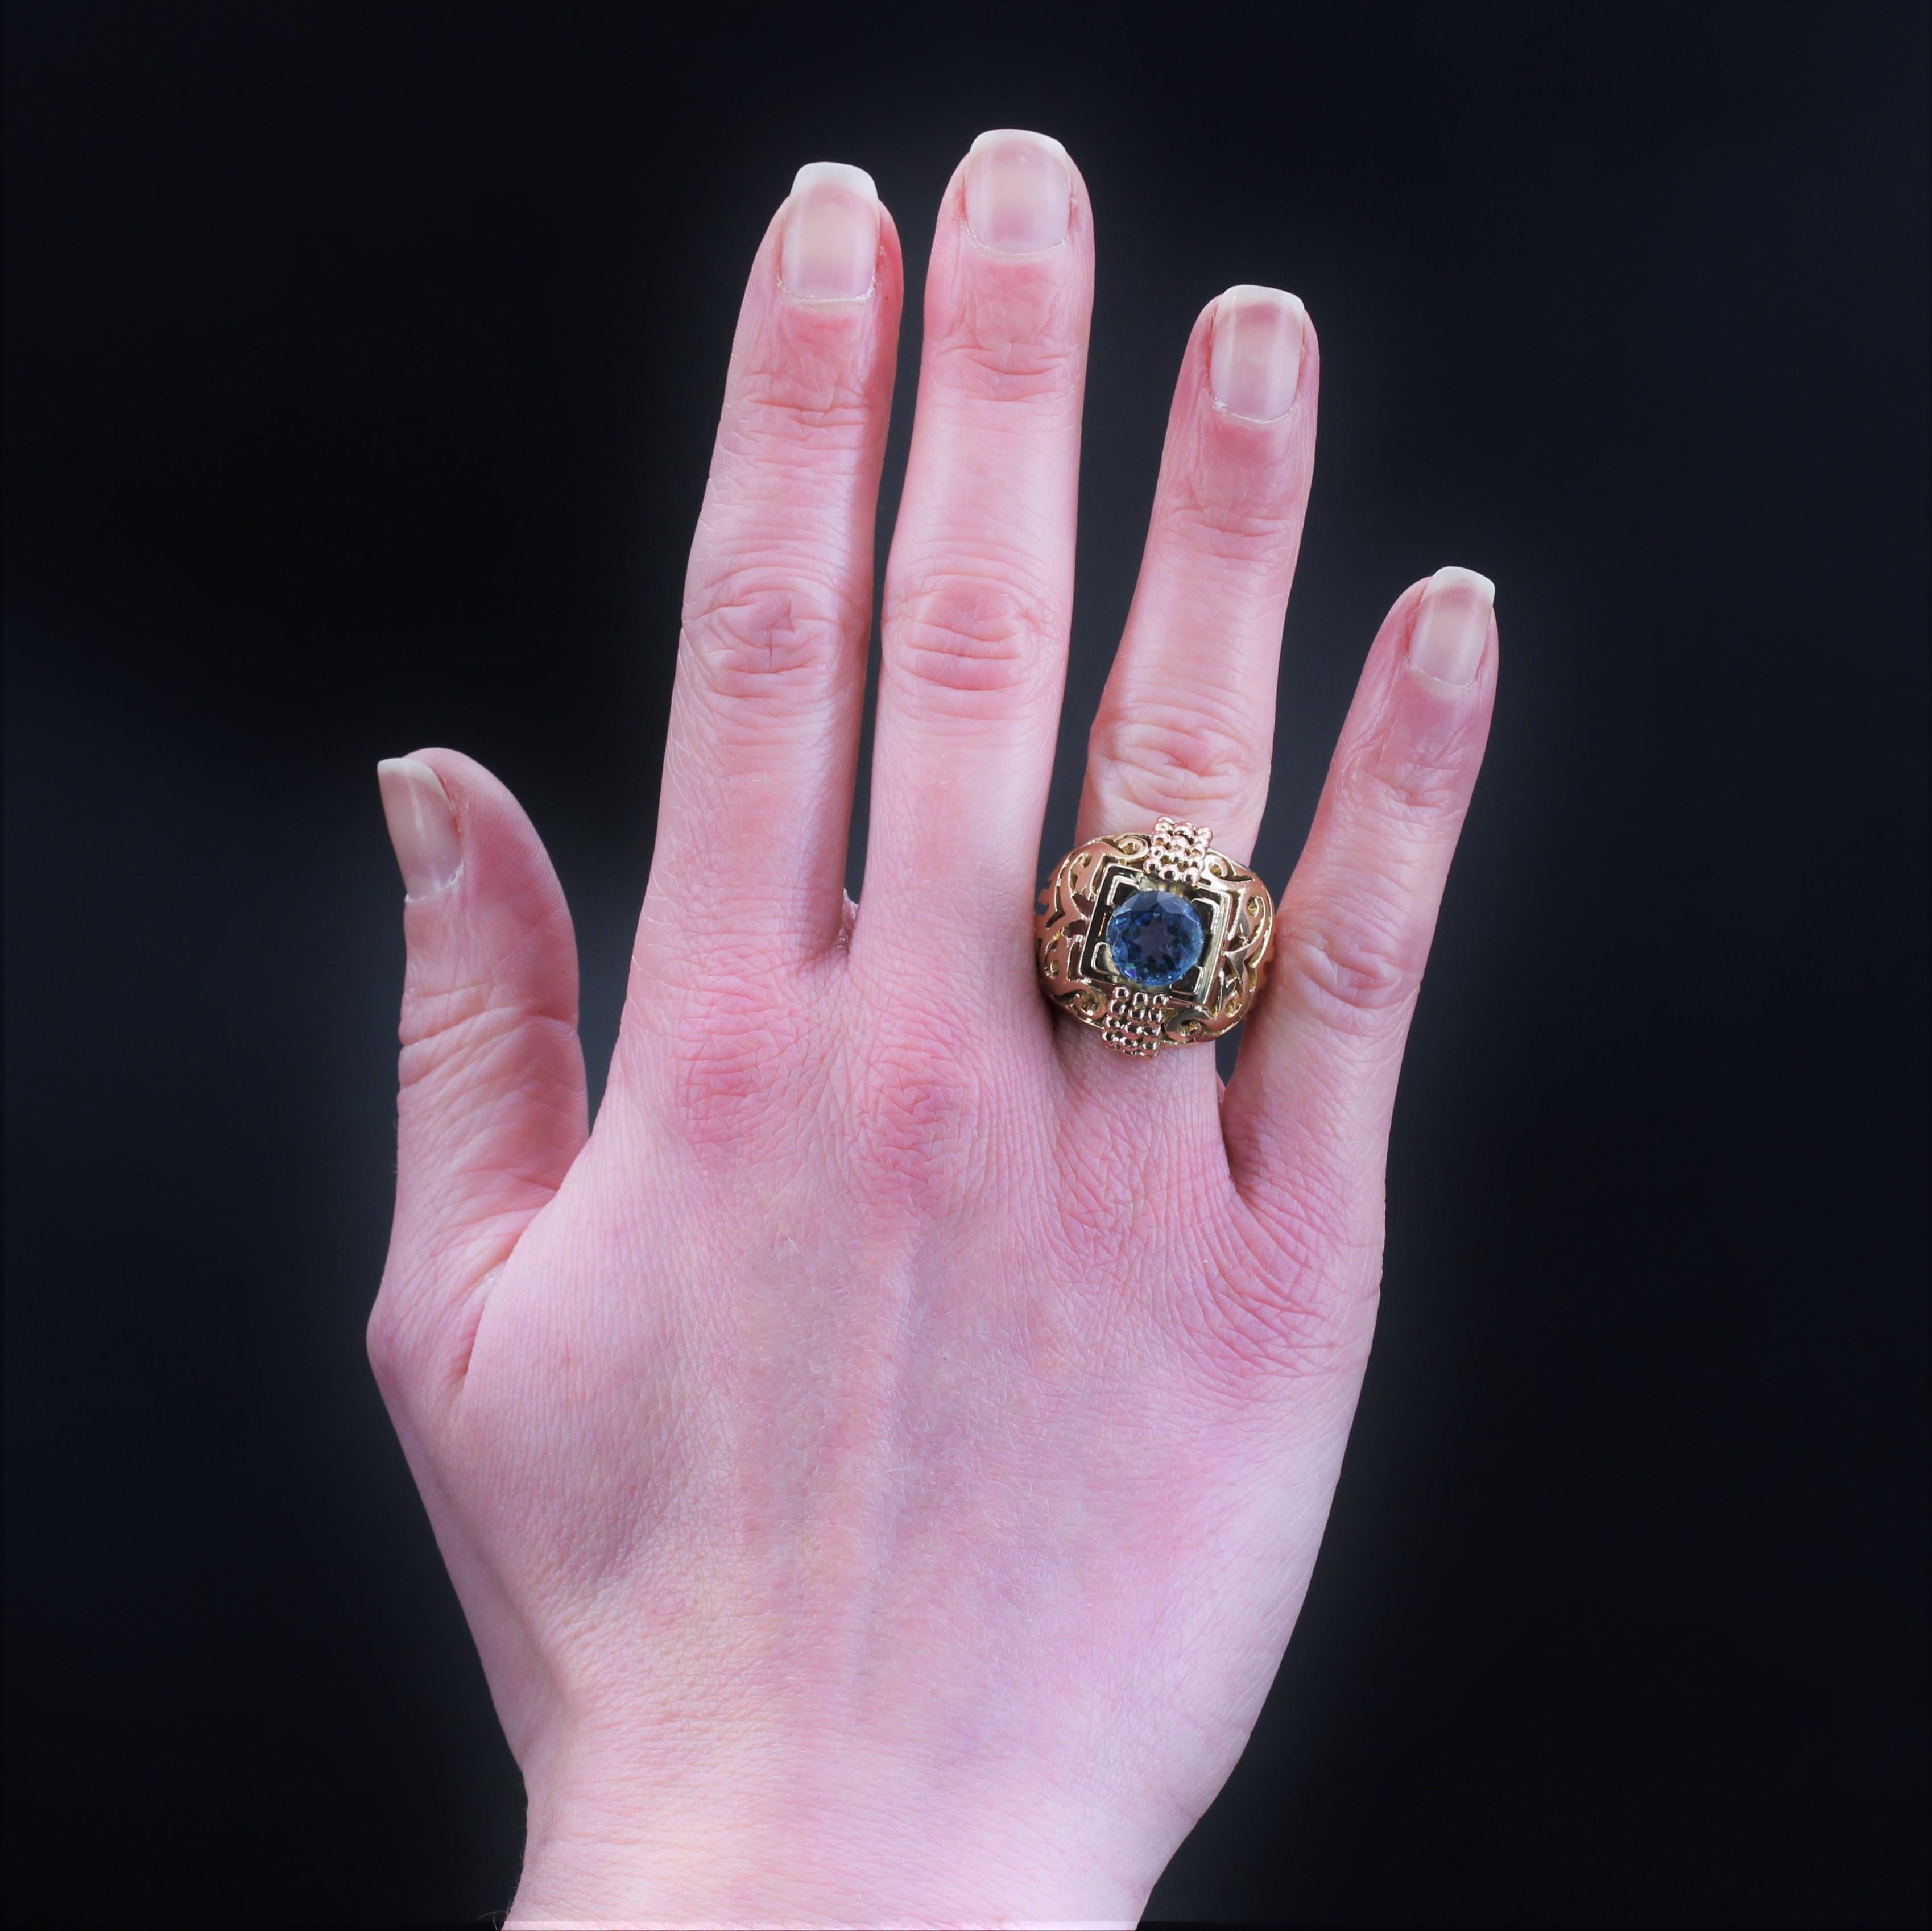 Ring in 18 karat yellow gold.
Dome ring, its setting is pierced with decorations in arabesques and lines on its two upper thirds. In the center, a geometrical setting holds a round faceted aquamarine of the most beautiful hue with 4 flat claws. Two